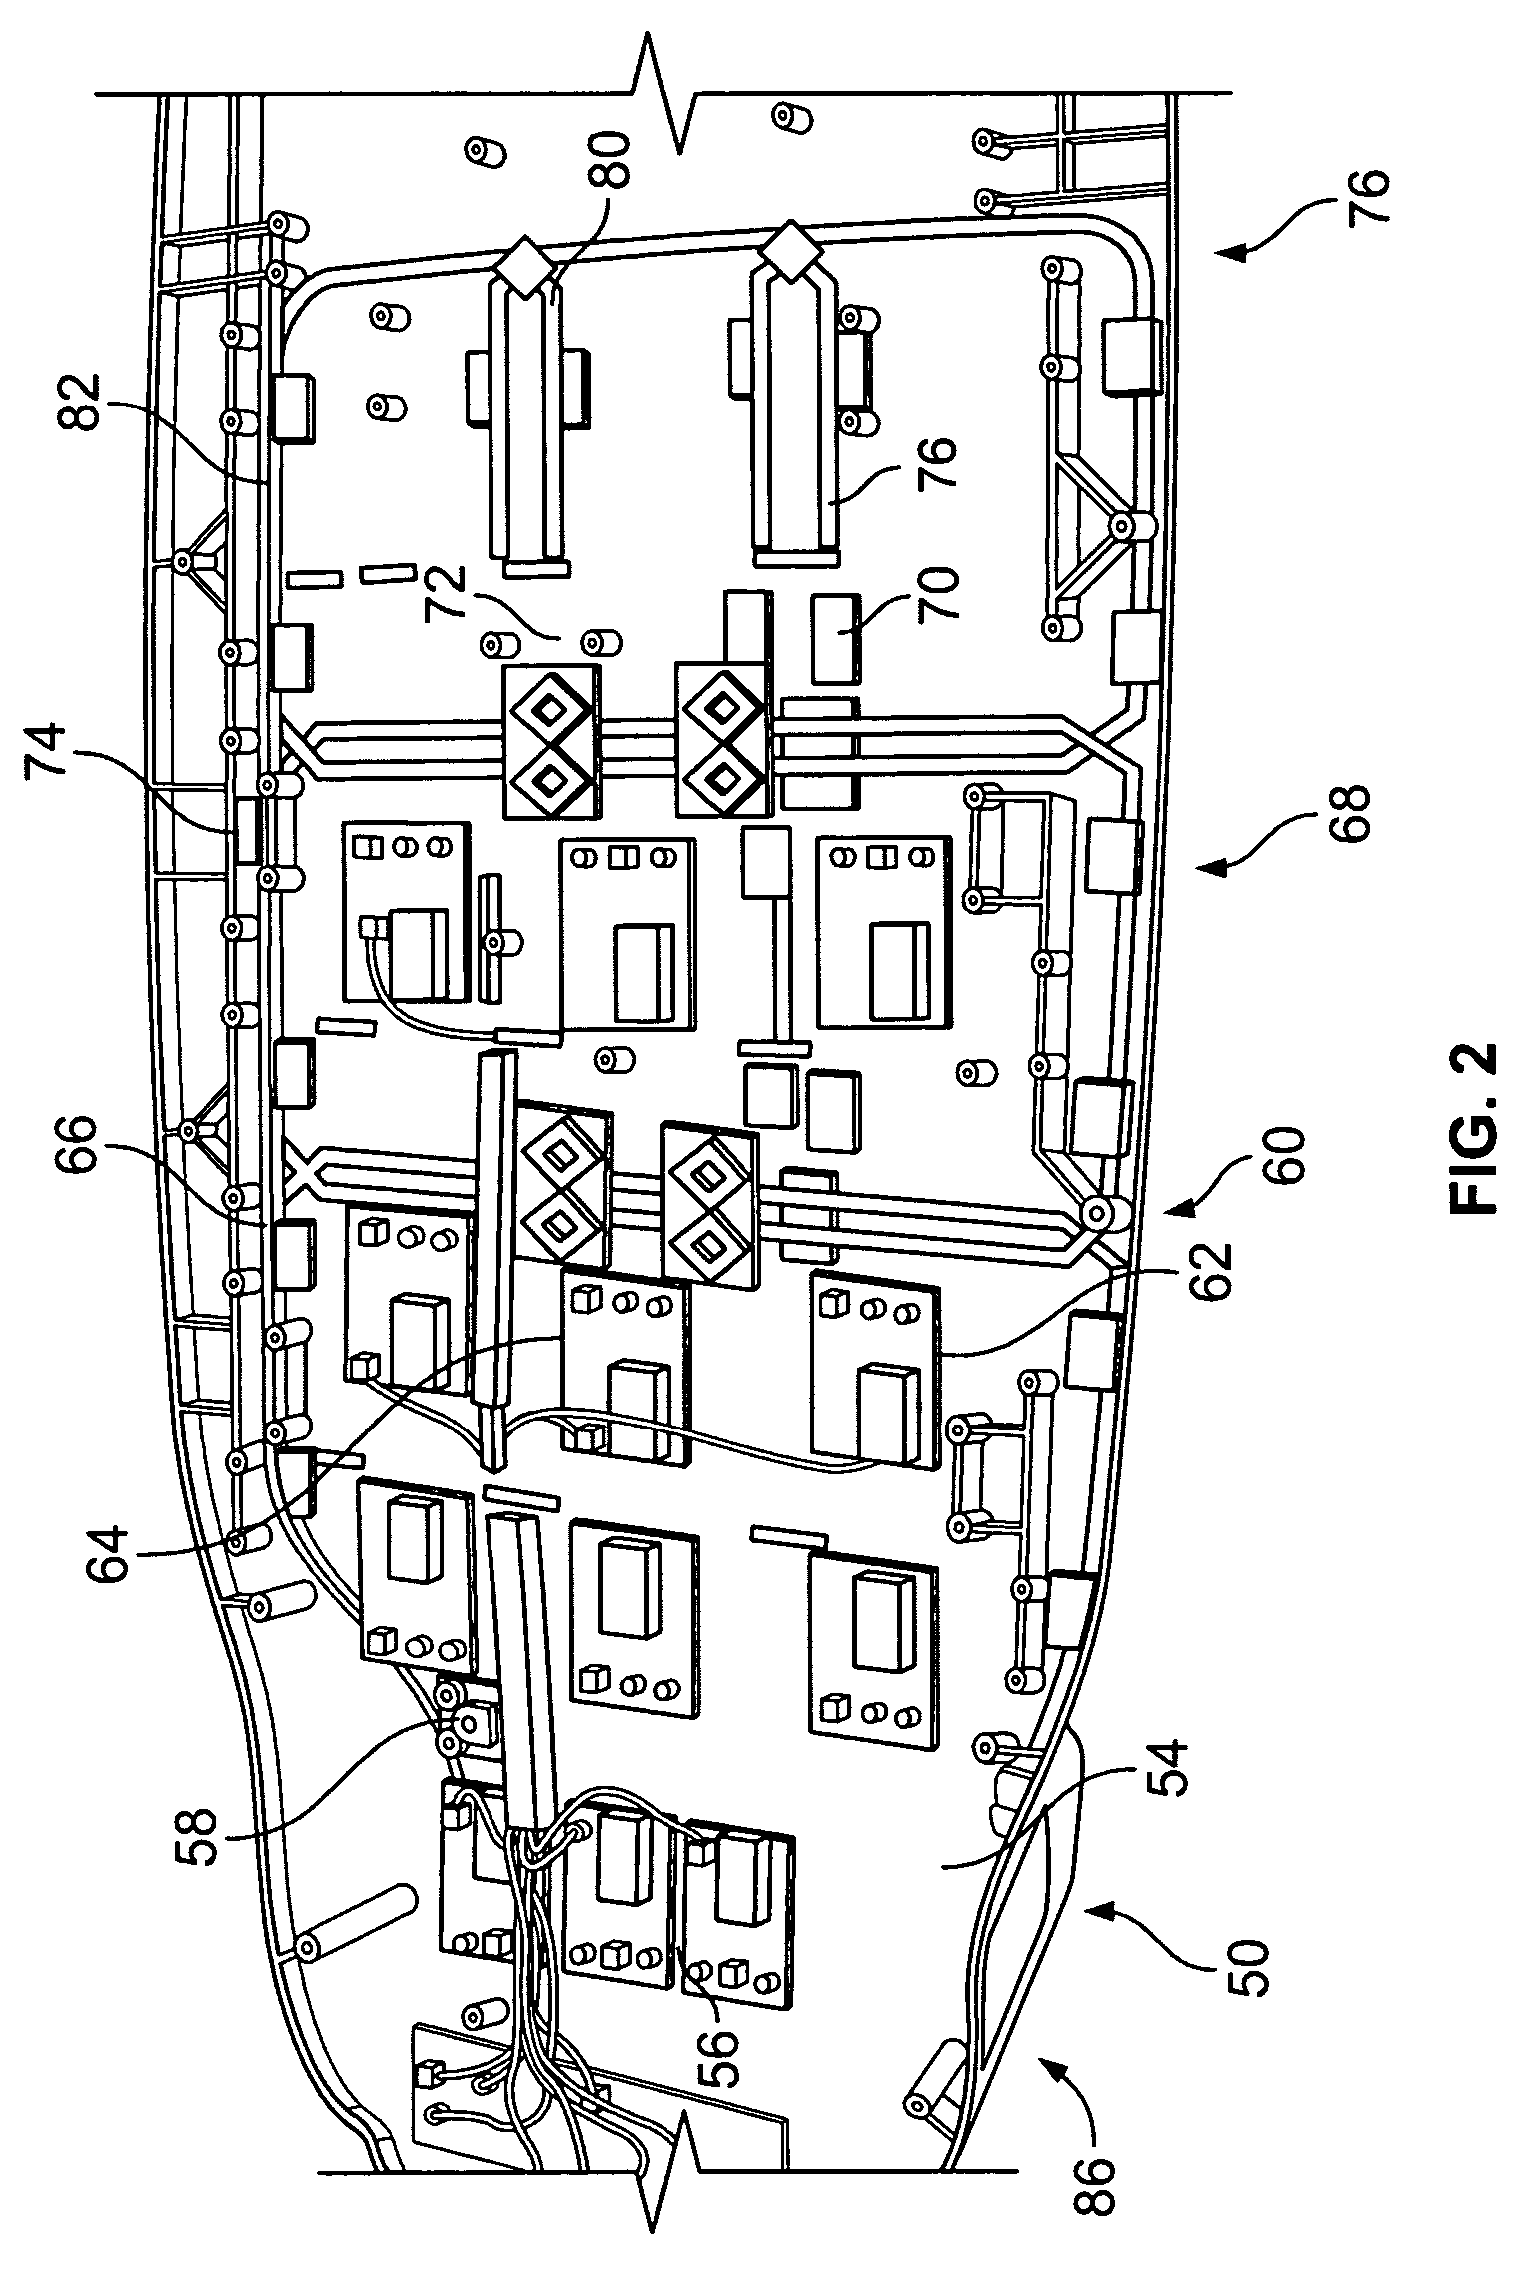 Cervical-thoracic-lumbar spine phased array coil for Magnetic Resonance Imaging